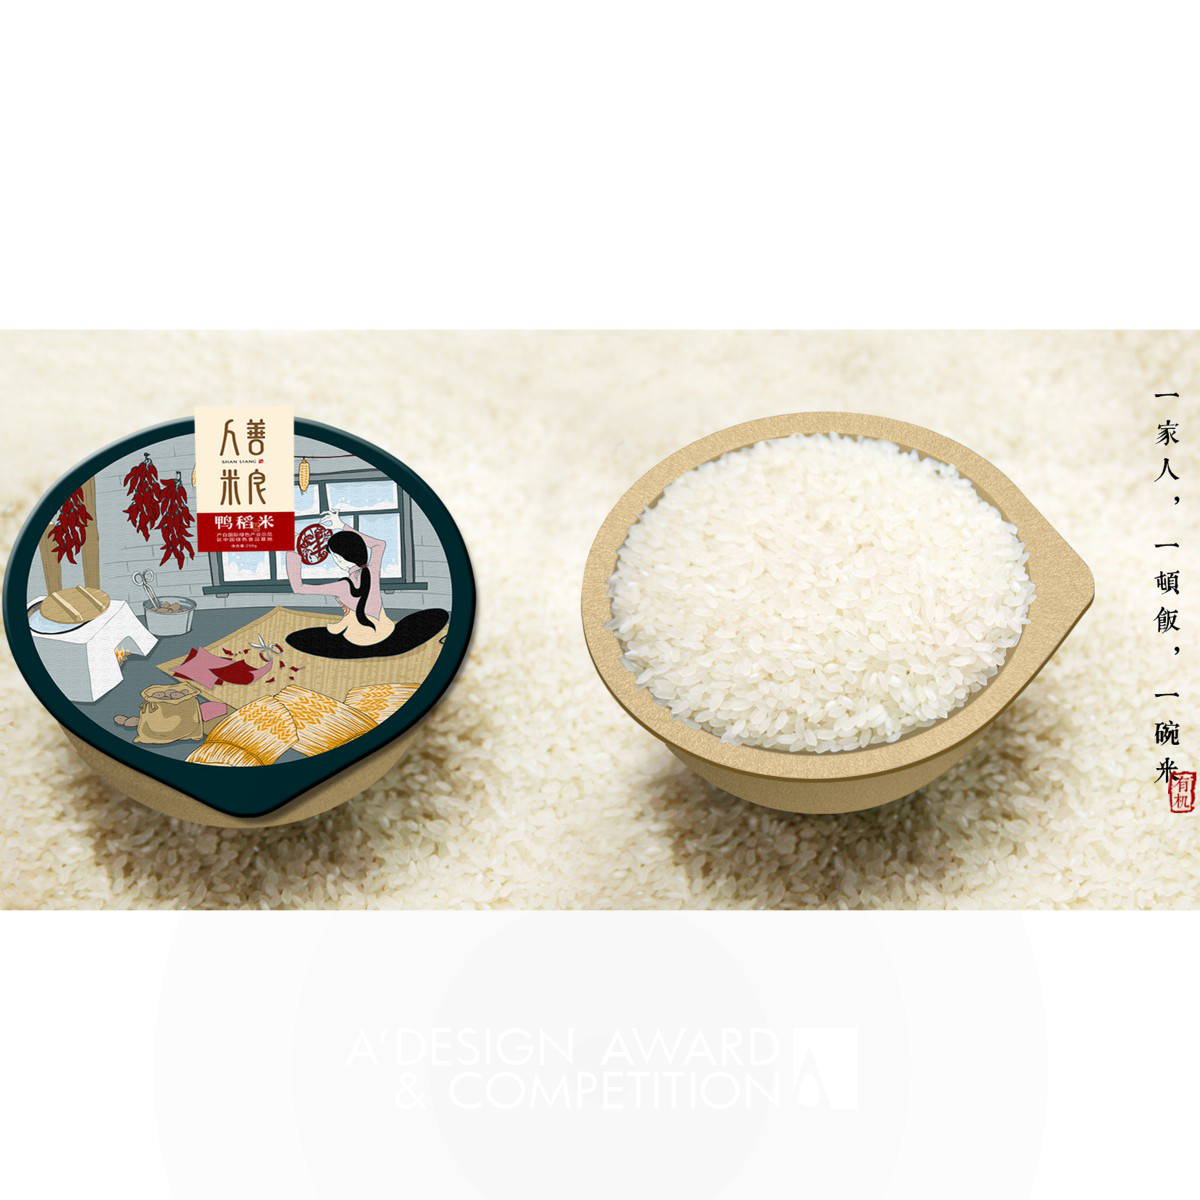 Shanliang Rice Packaging Design by Dongdao Creative Branding Group